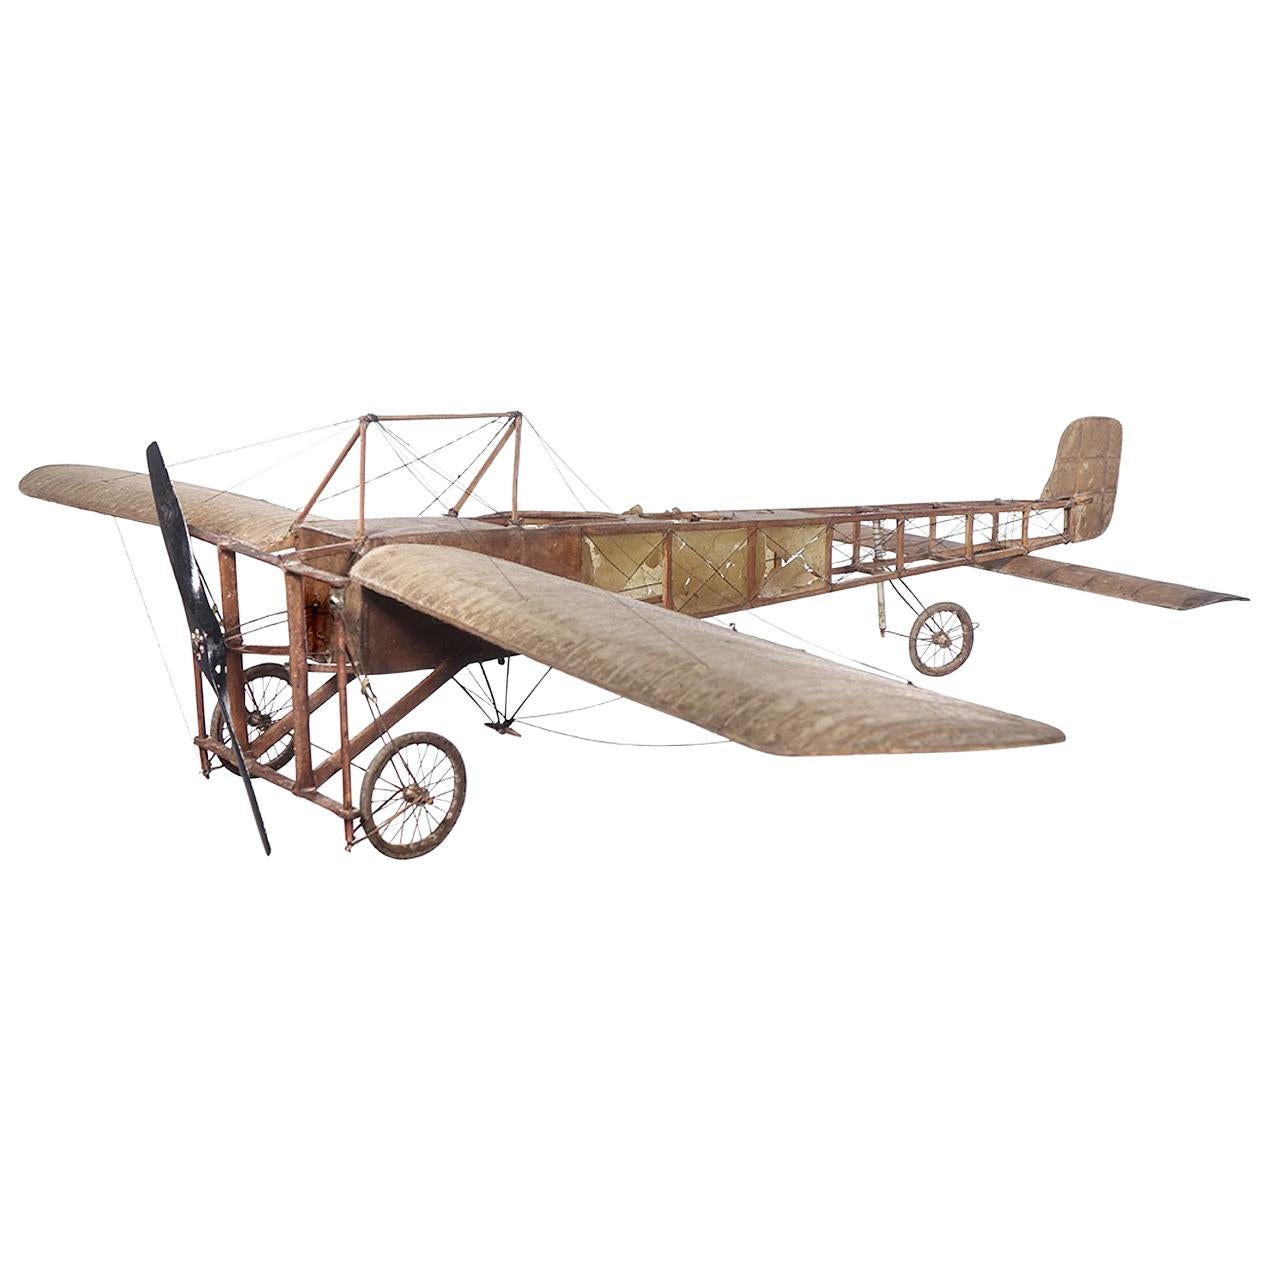 Very Early Model of a 1909 Louis Bleriot Aircraft